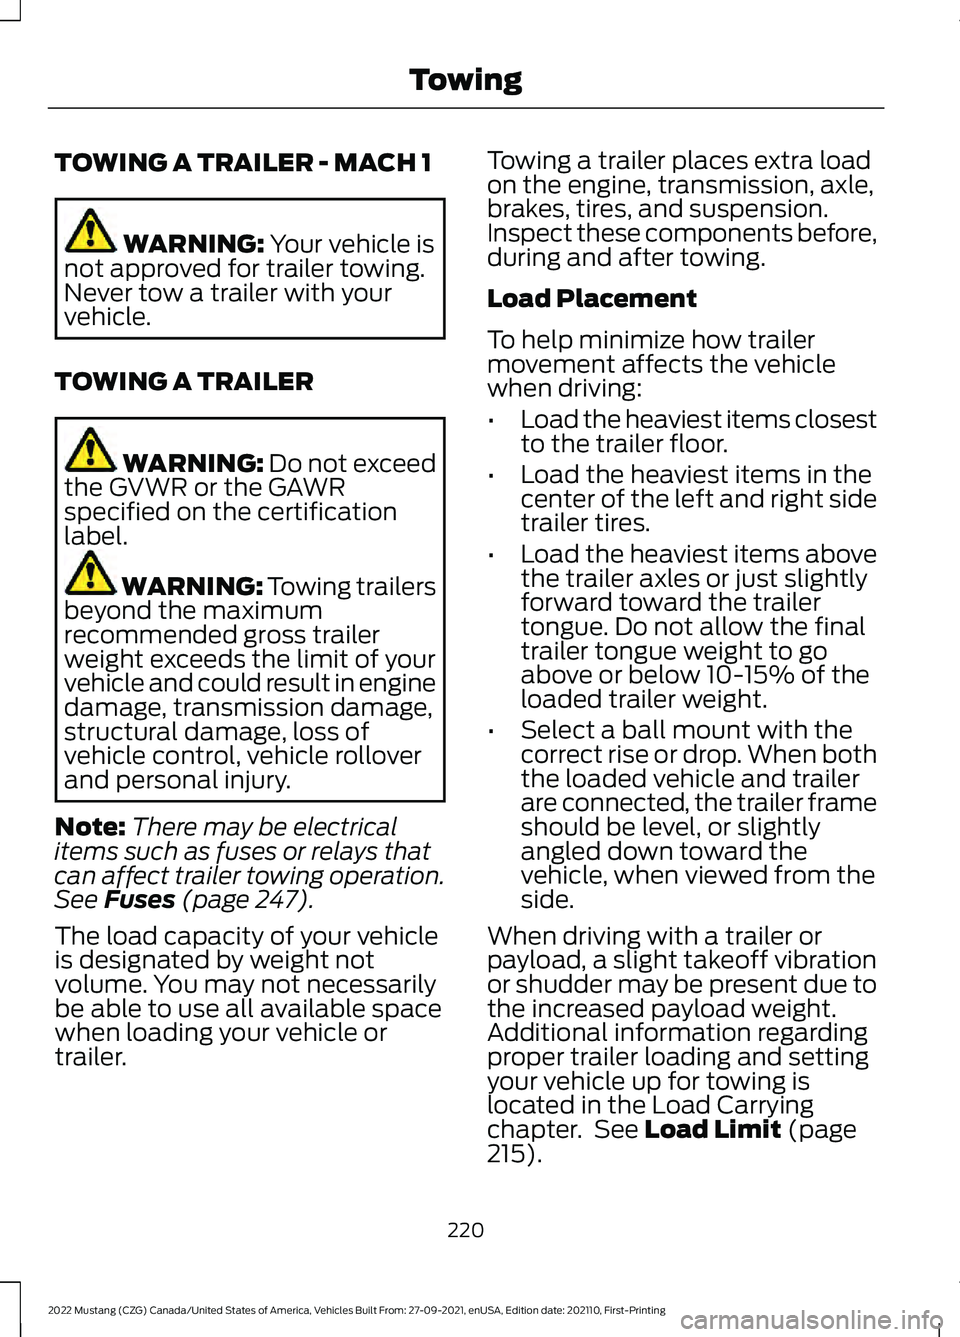 FORD MUSTANG 2022  Owners Manual TOWING A TRAILER - MACH 1
WARNING: Your vehicle is
not approved for trailer towing.
Never tow a trailer with your
vehicle.
TOWING A TRAILER WARNING: 
Do not exceed
the GVWR or the GAWR
specified on th